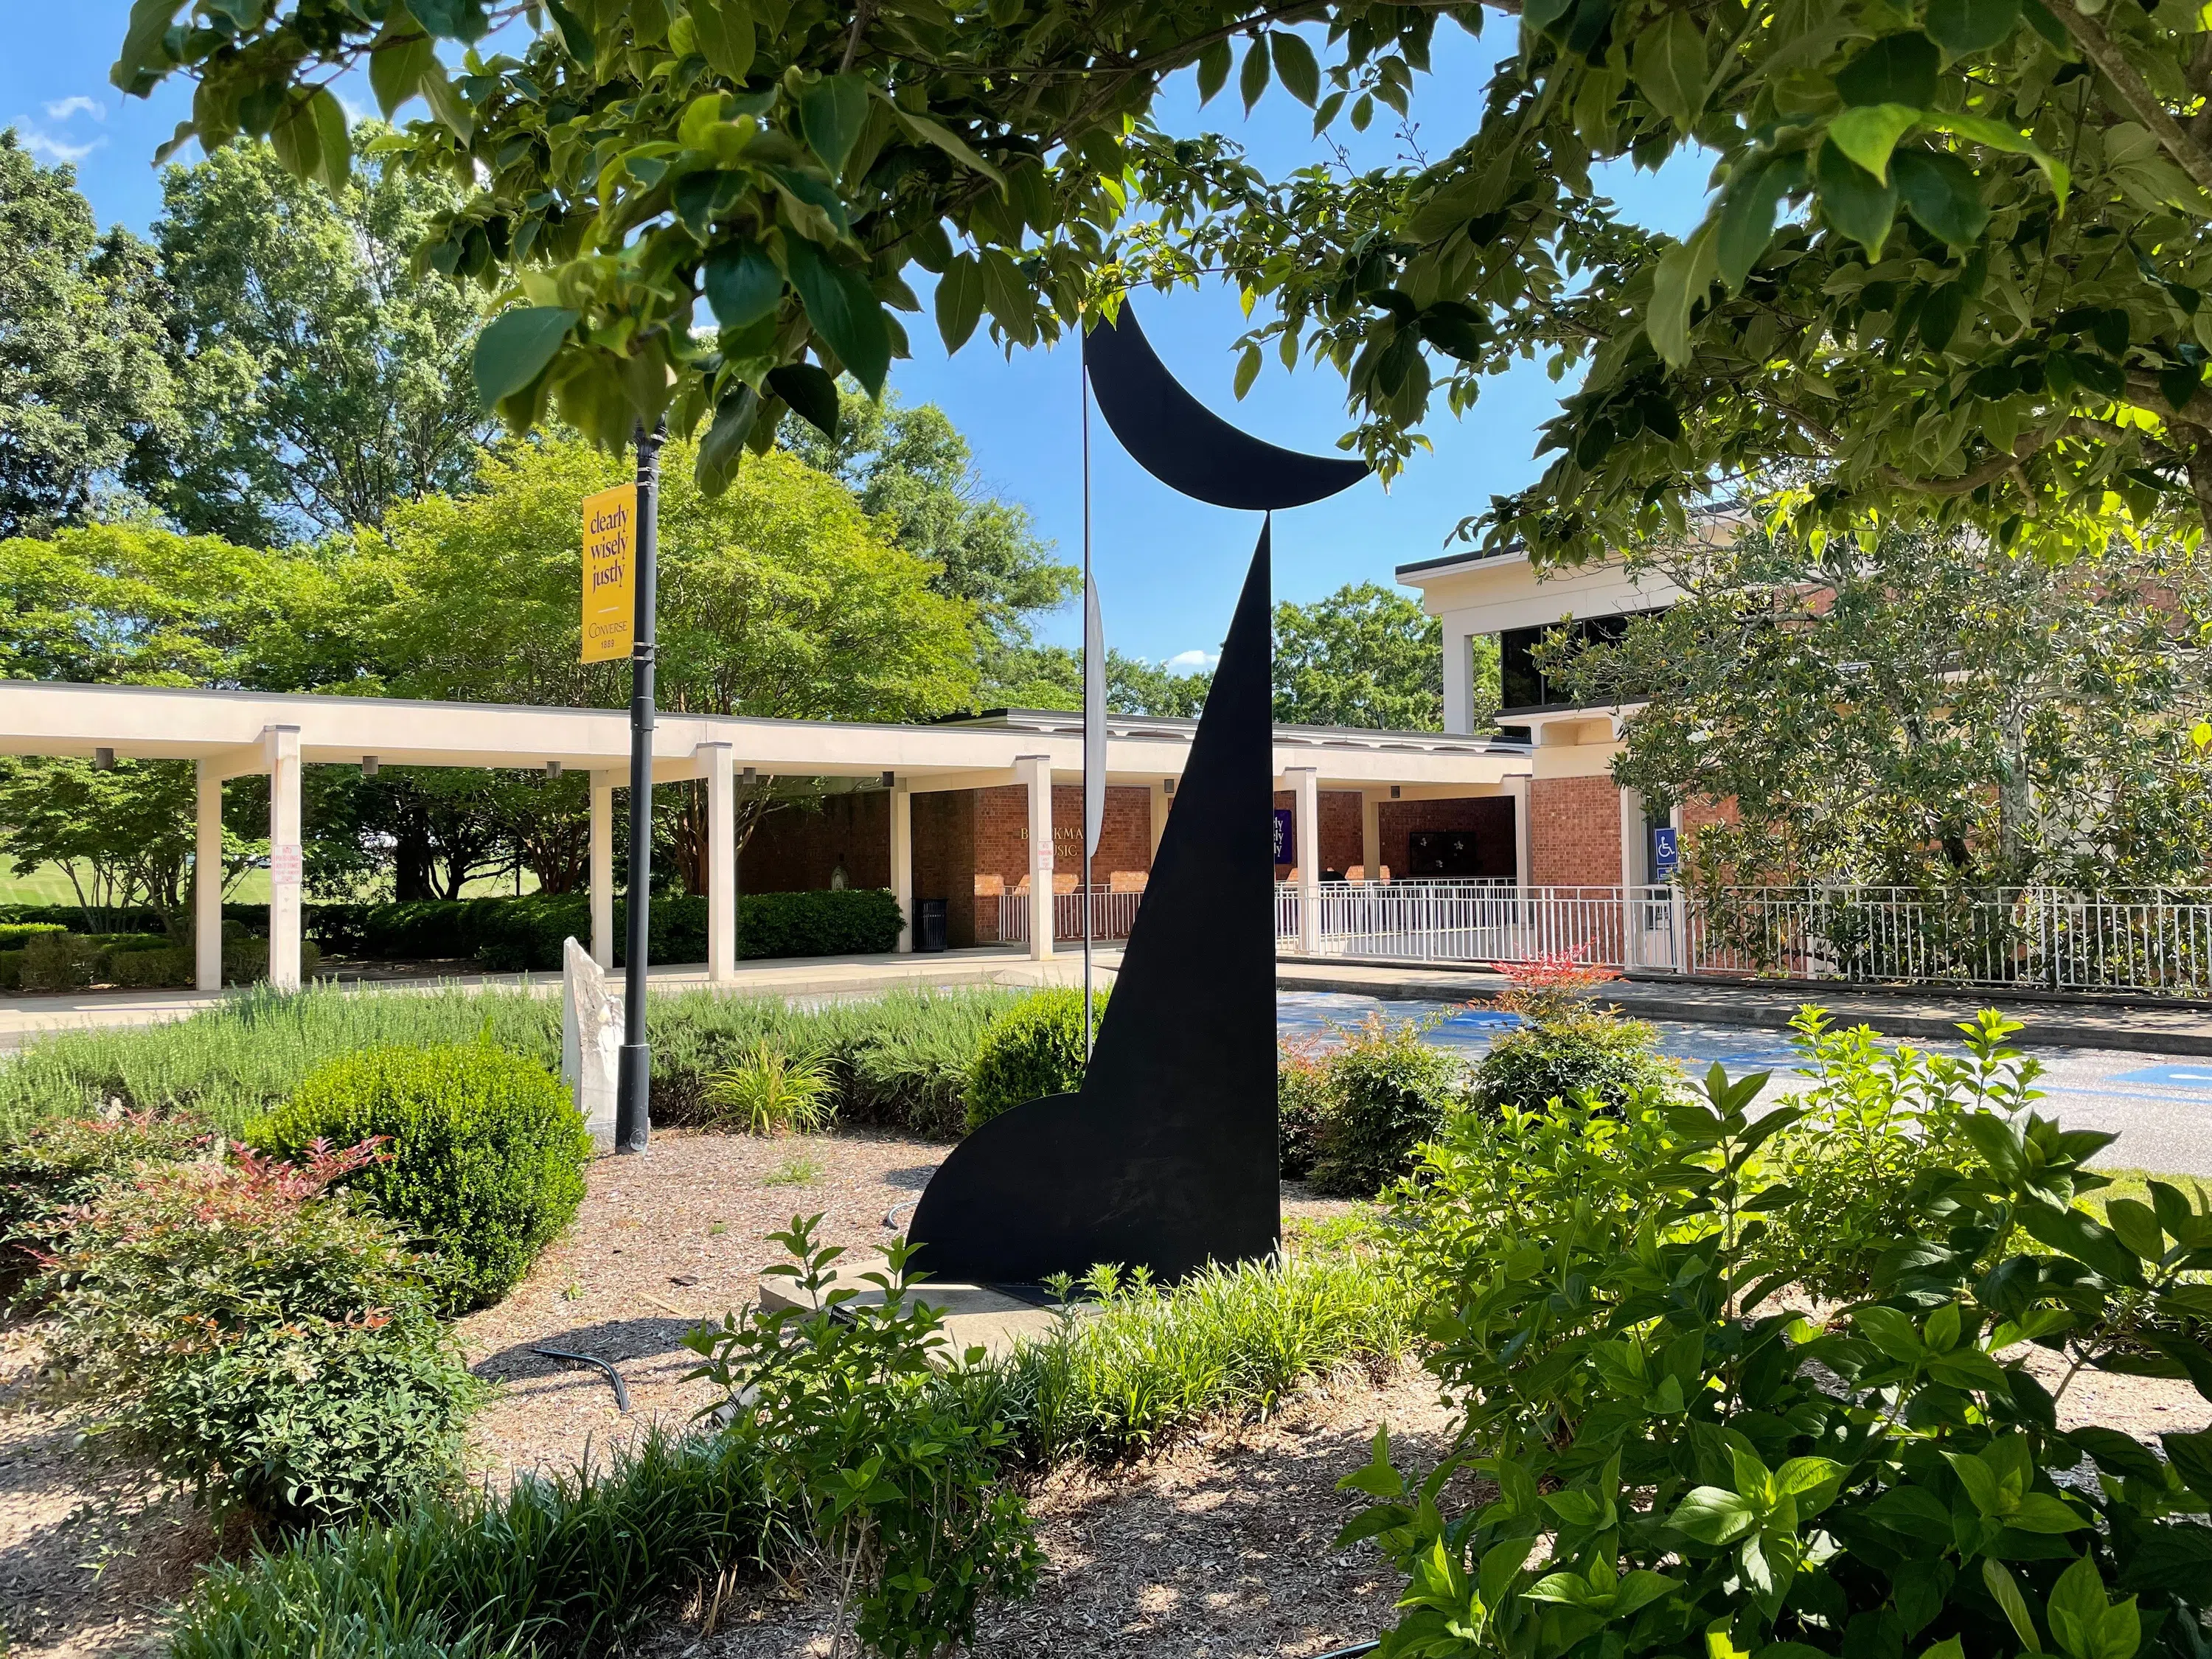 A metal, geometric sculpture appears in the foreground before a one-story building with a covered walkway.